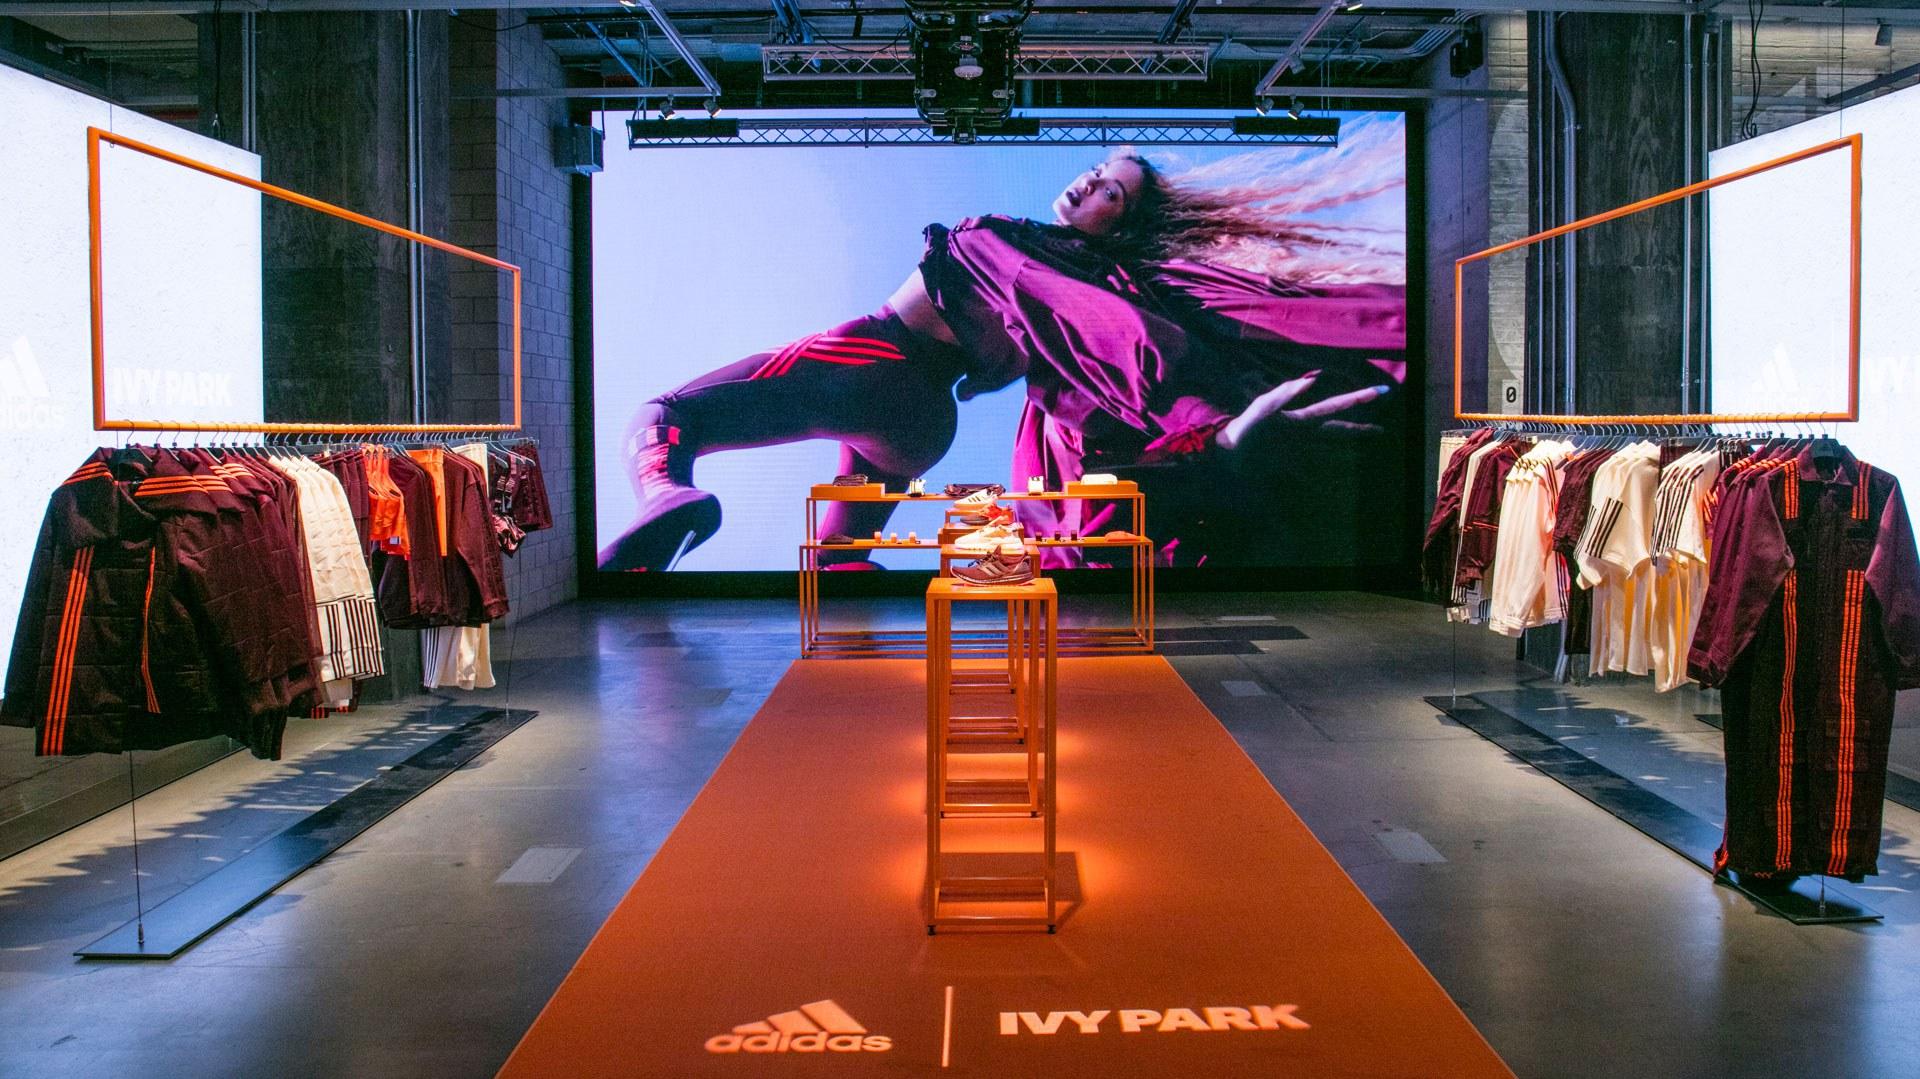 Adidas Ivy Park Roundhouse Agency